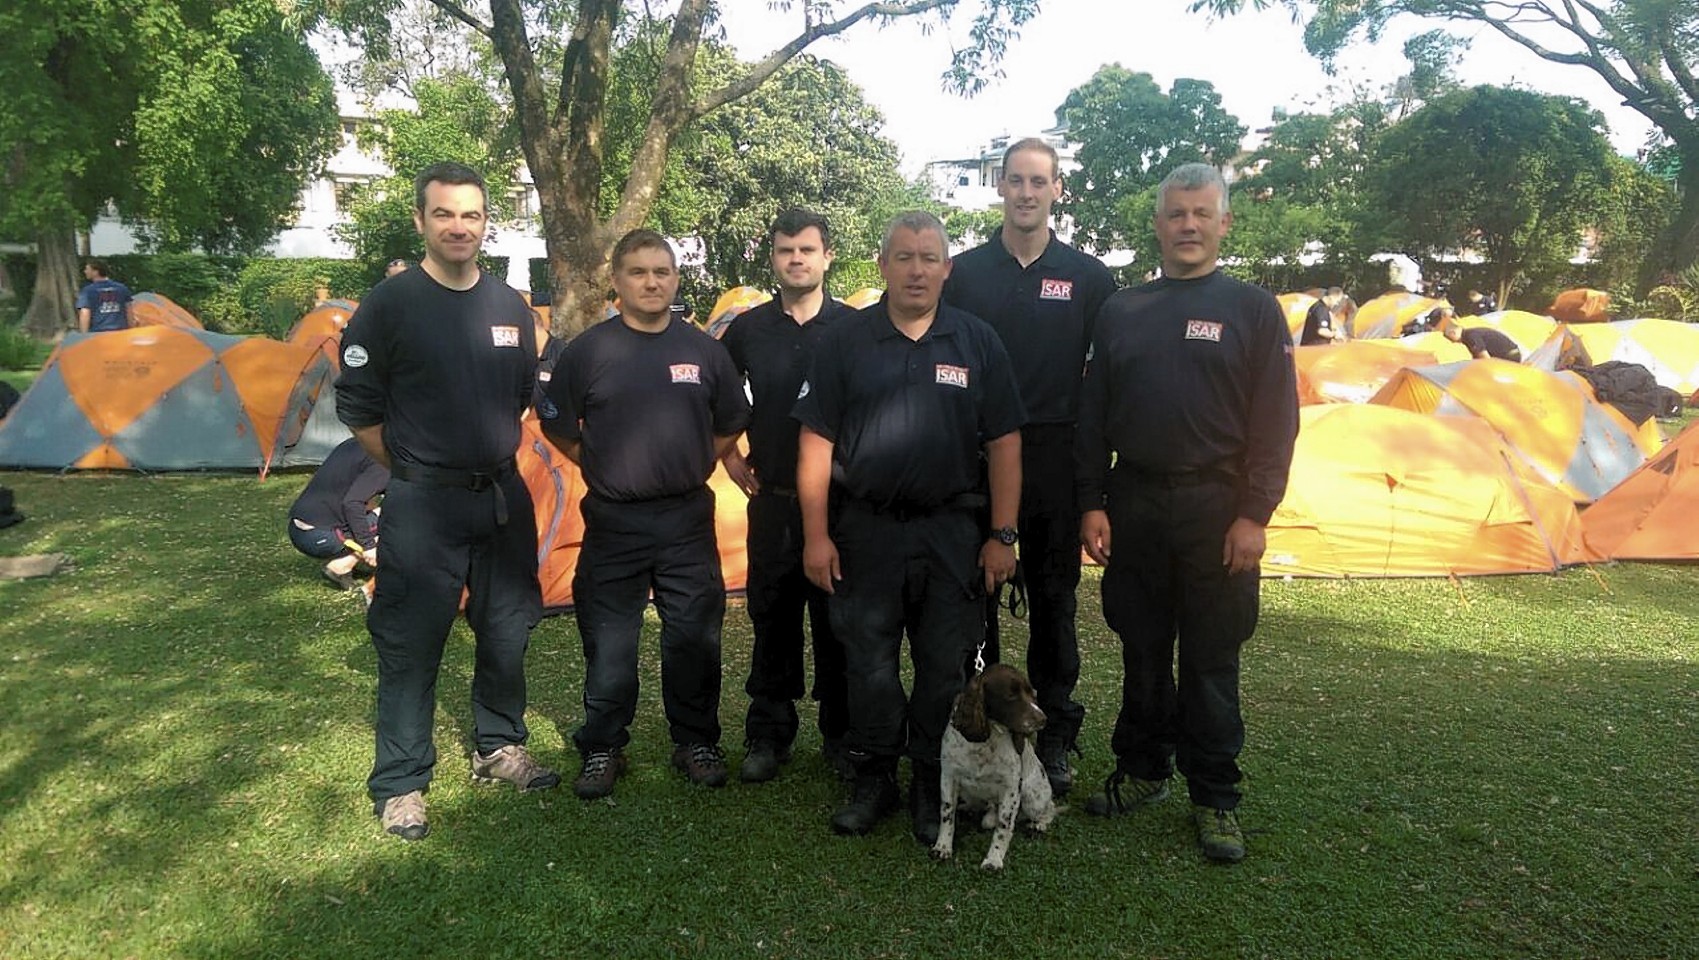 Scottish Fire and Rescue Service's UKISAR team in Nepal (from left to right) John Aitchison, Danny Gall, Steve Nicoll, Garry Caroll & Diesel, Martin Vardy and Martyn Ferguson